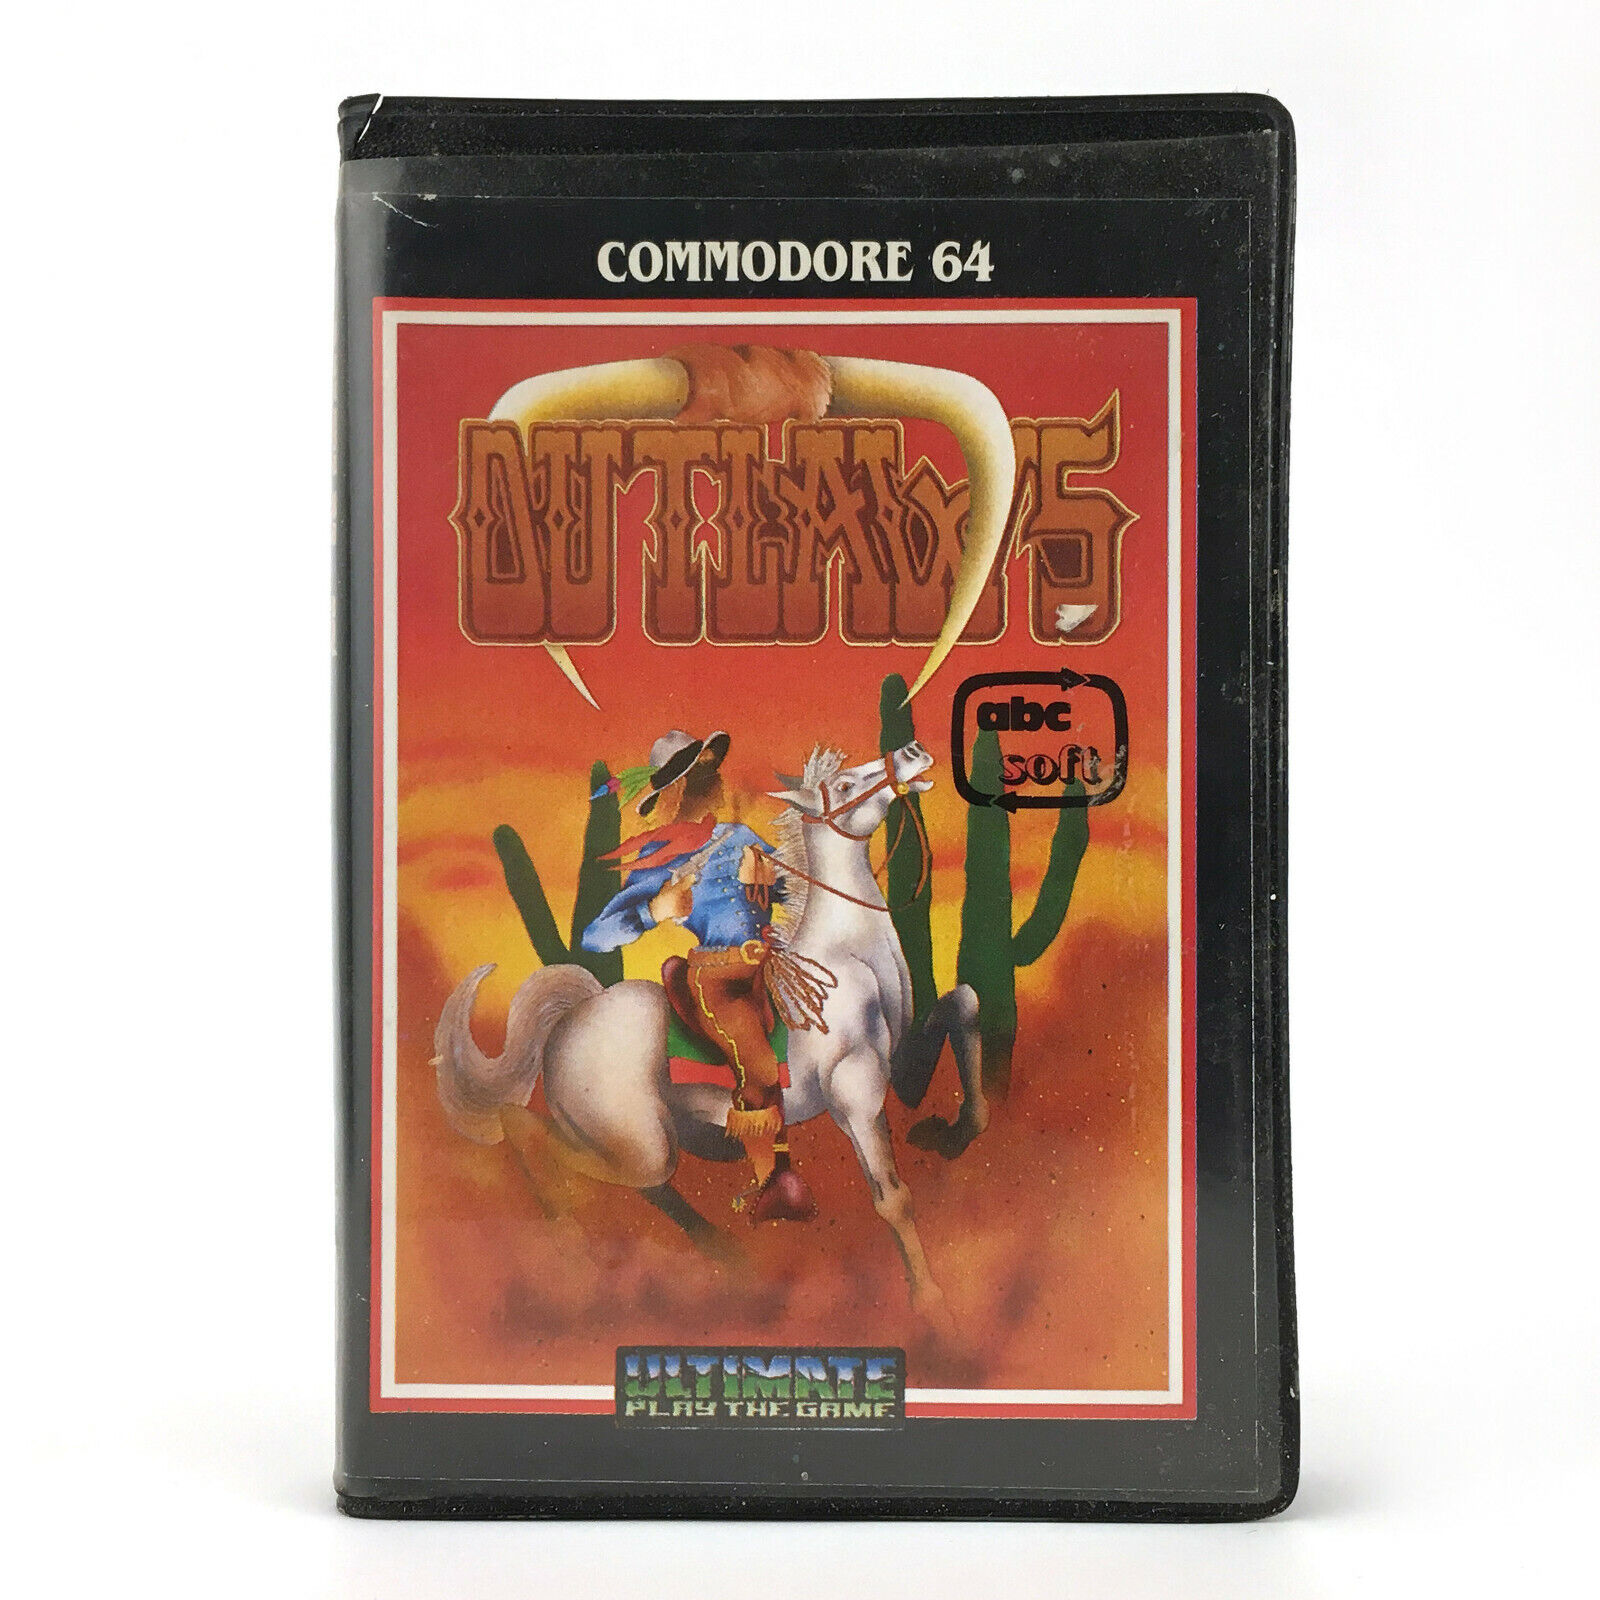 COMMODORE 64 C64 OUTLAWS ESTUCHE ABC SOFT / ULTIMATE PLAY THE GAME 1985 CASSETTE